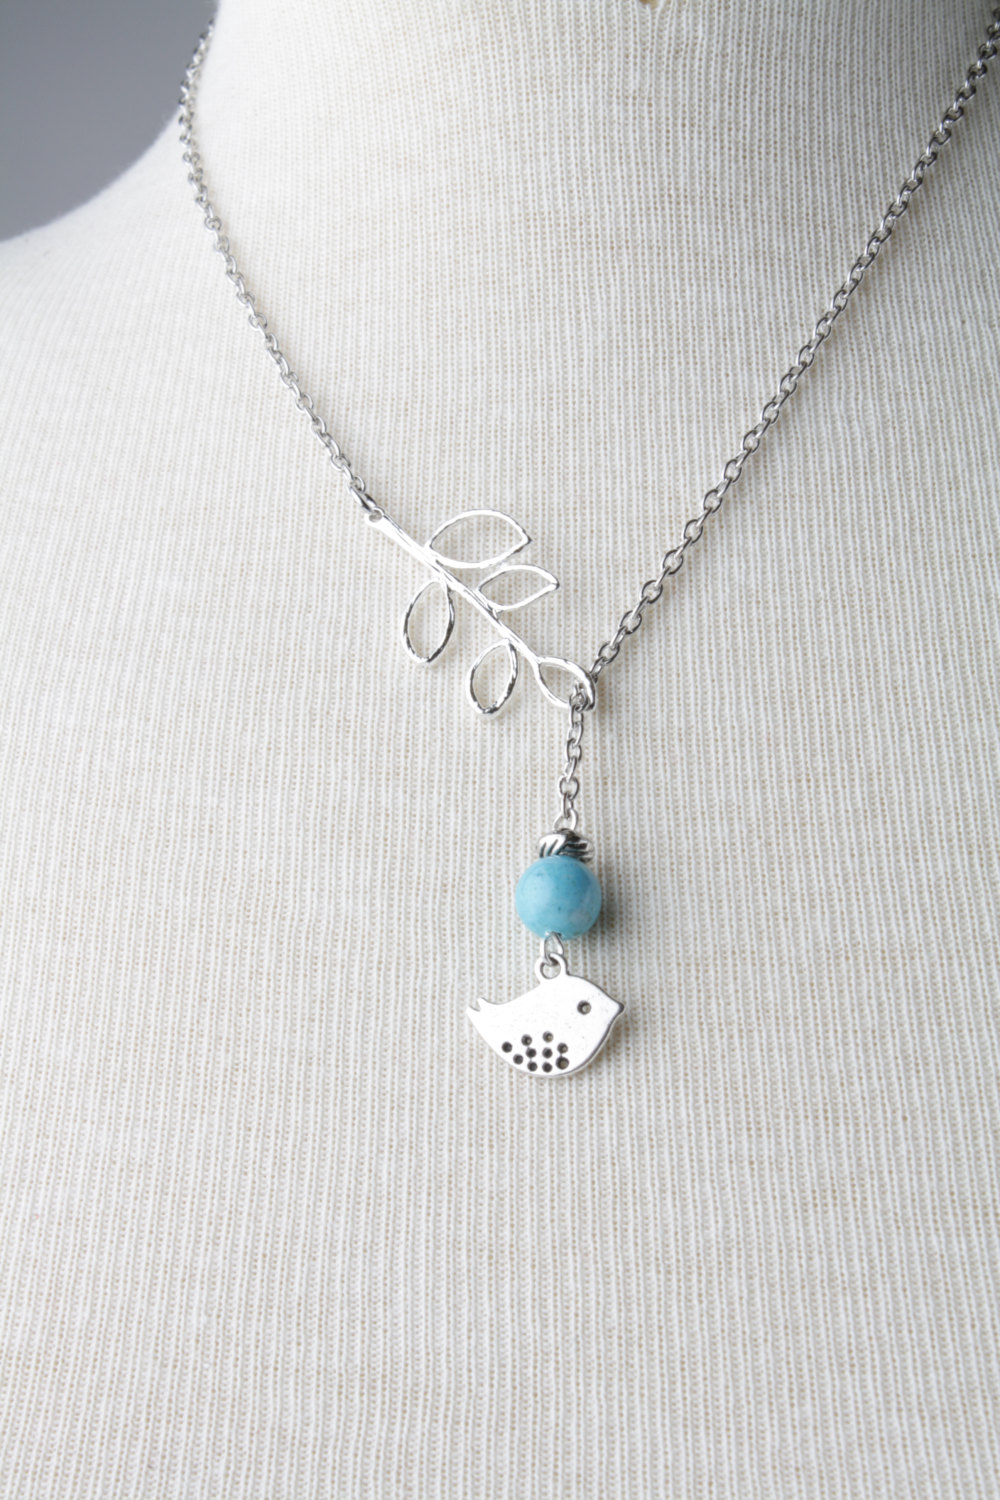 Silver Bird And Branch Lariat Necklace With Blue Fossil Stone- Silver Plated Chain- Bird Jewelry - Bird Necklace - Bird Lariat